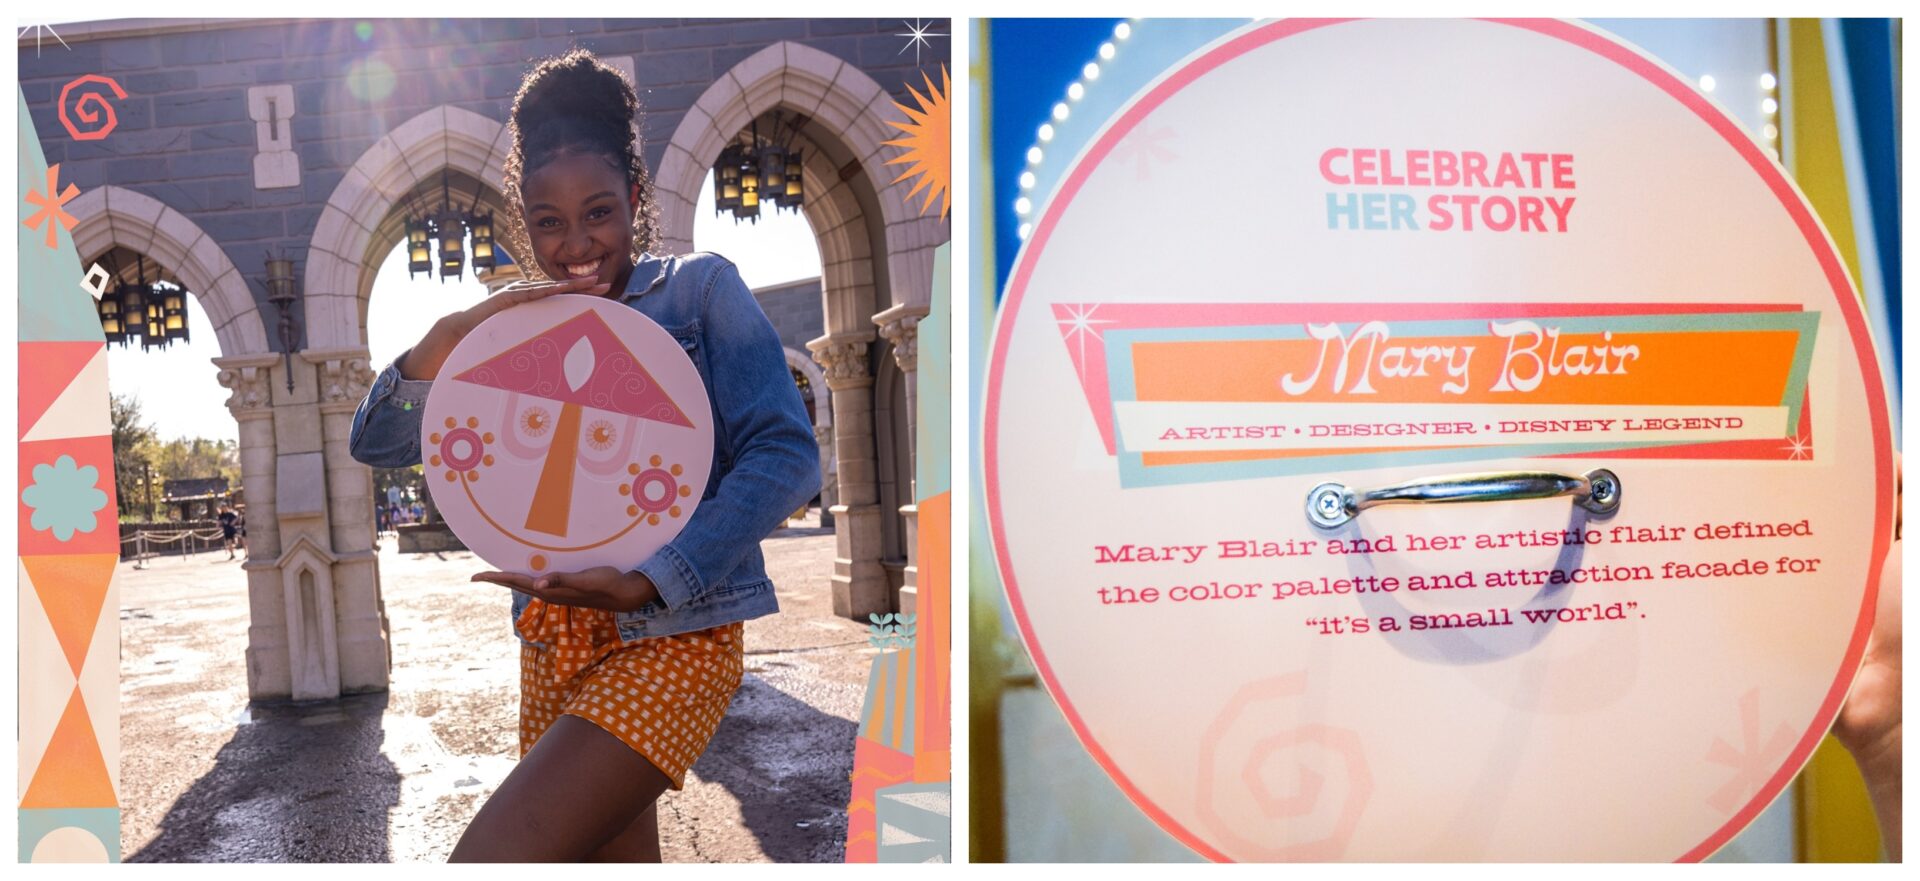 New Women’s History Month PhotoPass Magic Shots featuring Mary Blair, Leota Toombs, and Harriet Burns